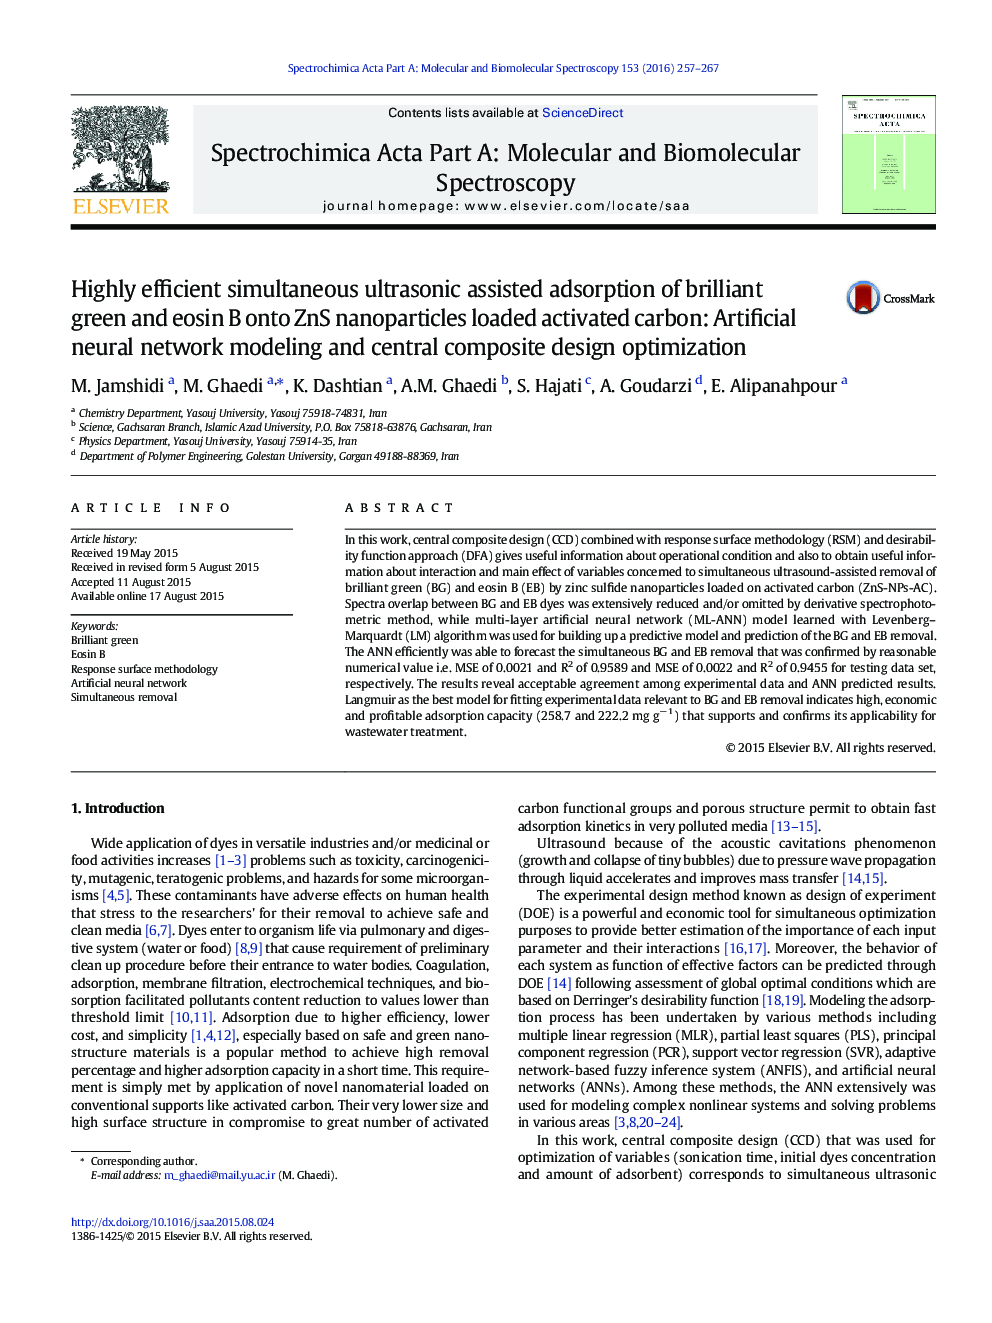 Highly efficient simultaneous ultrasonic assisted adsorption of brilliant green and eosin B onto ZnS nanoparticles loaded activated carbon: Artificial neural network modeling and central composite design optimization